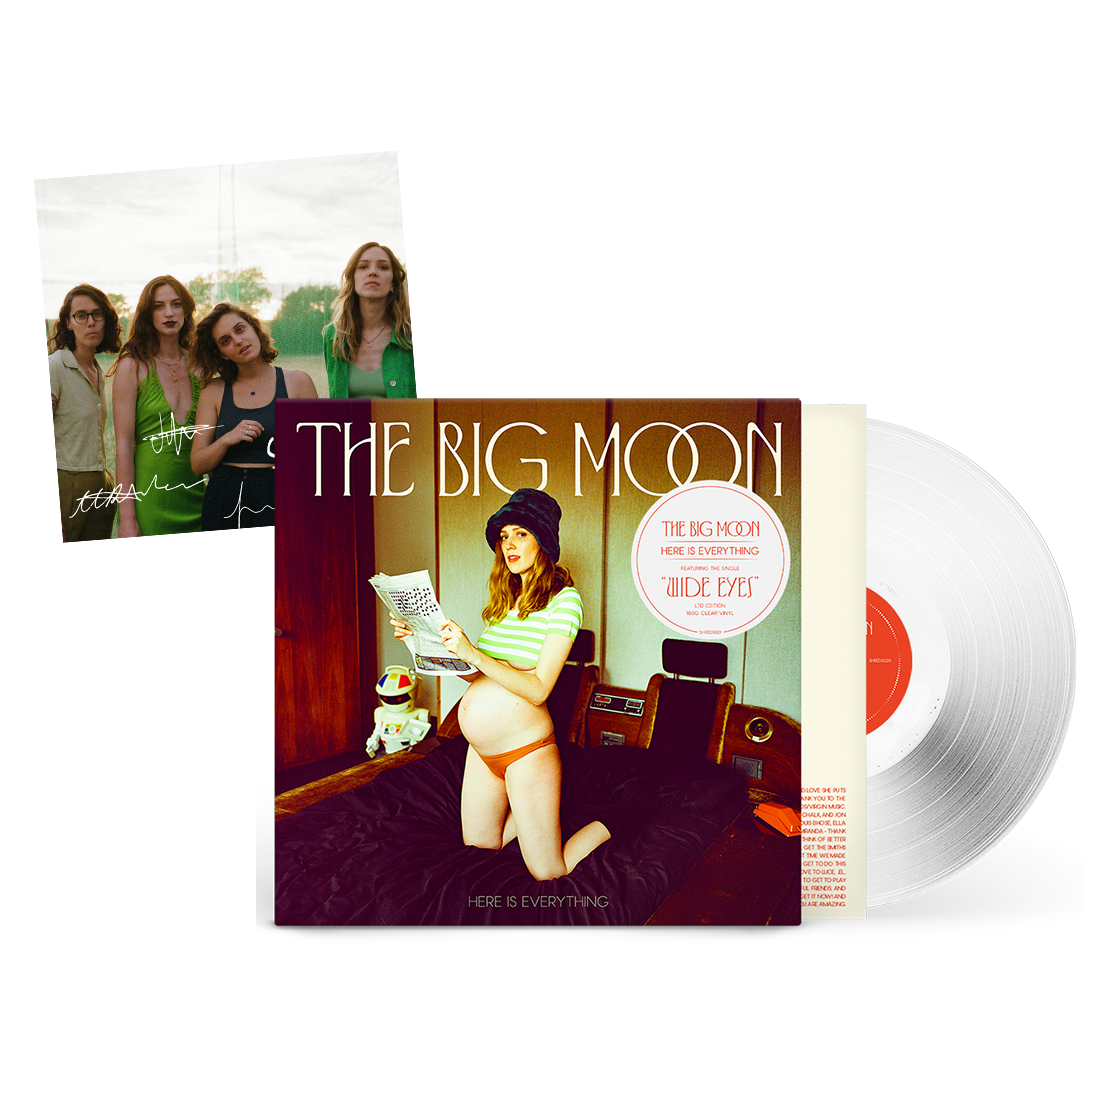 Here Is Everything: Limited Transparent Gatefold Vinyl LP + Exclusive Signed Print